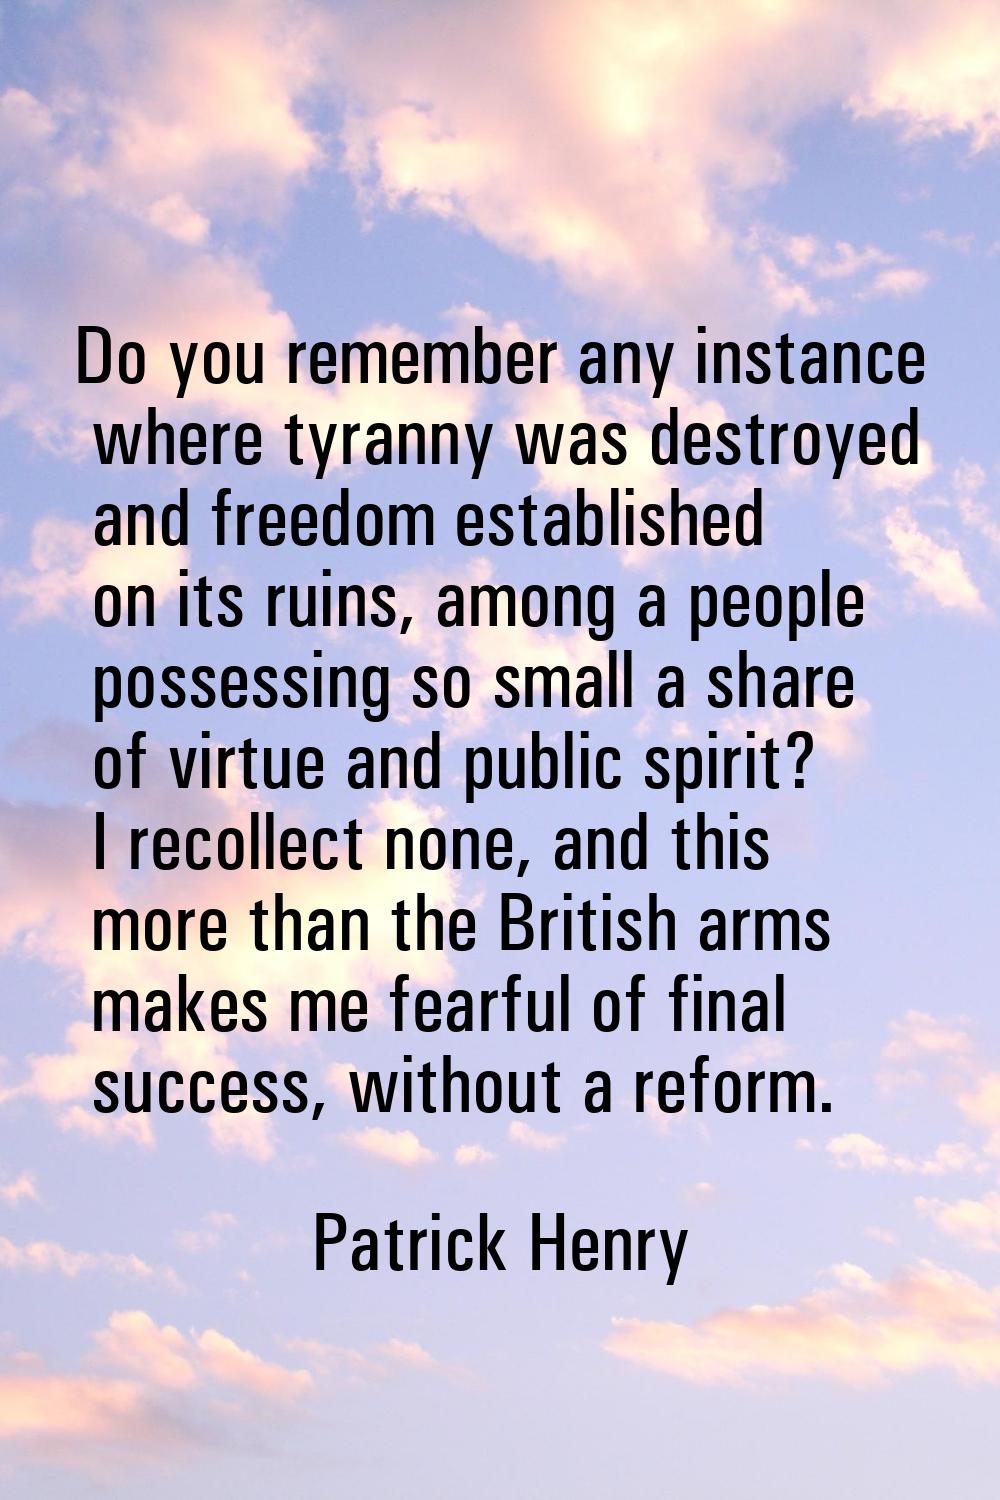 Do you remember any instance where tyranny was destroyed and freedom established on its ruins, amon